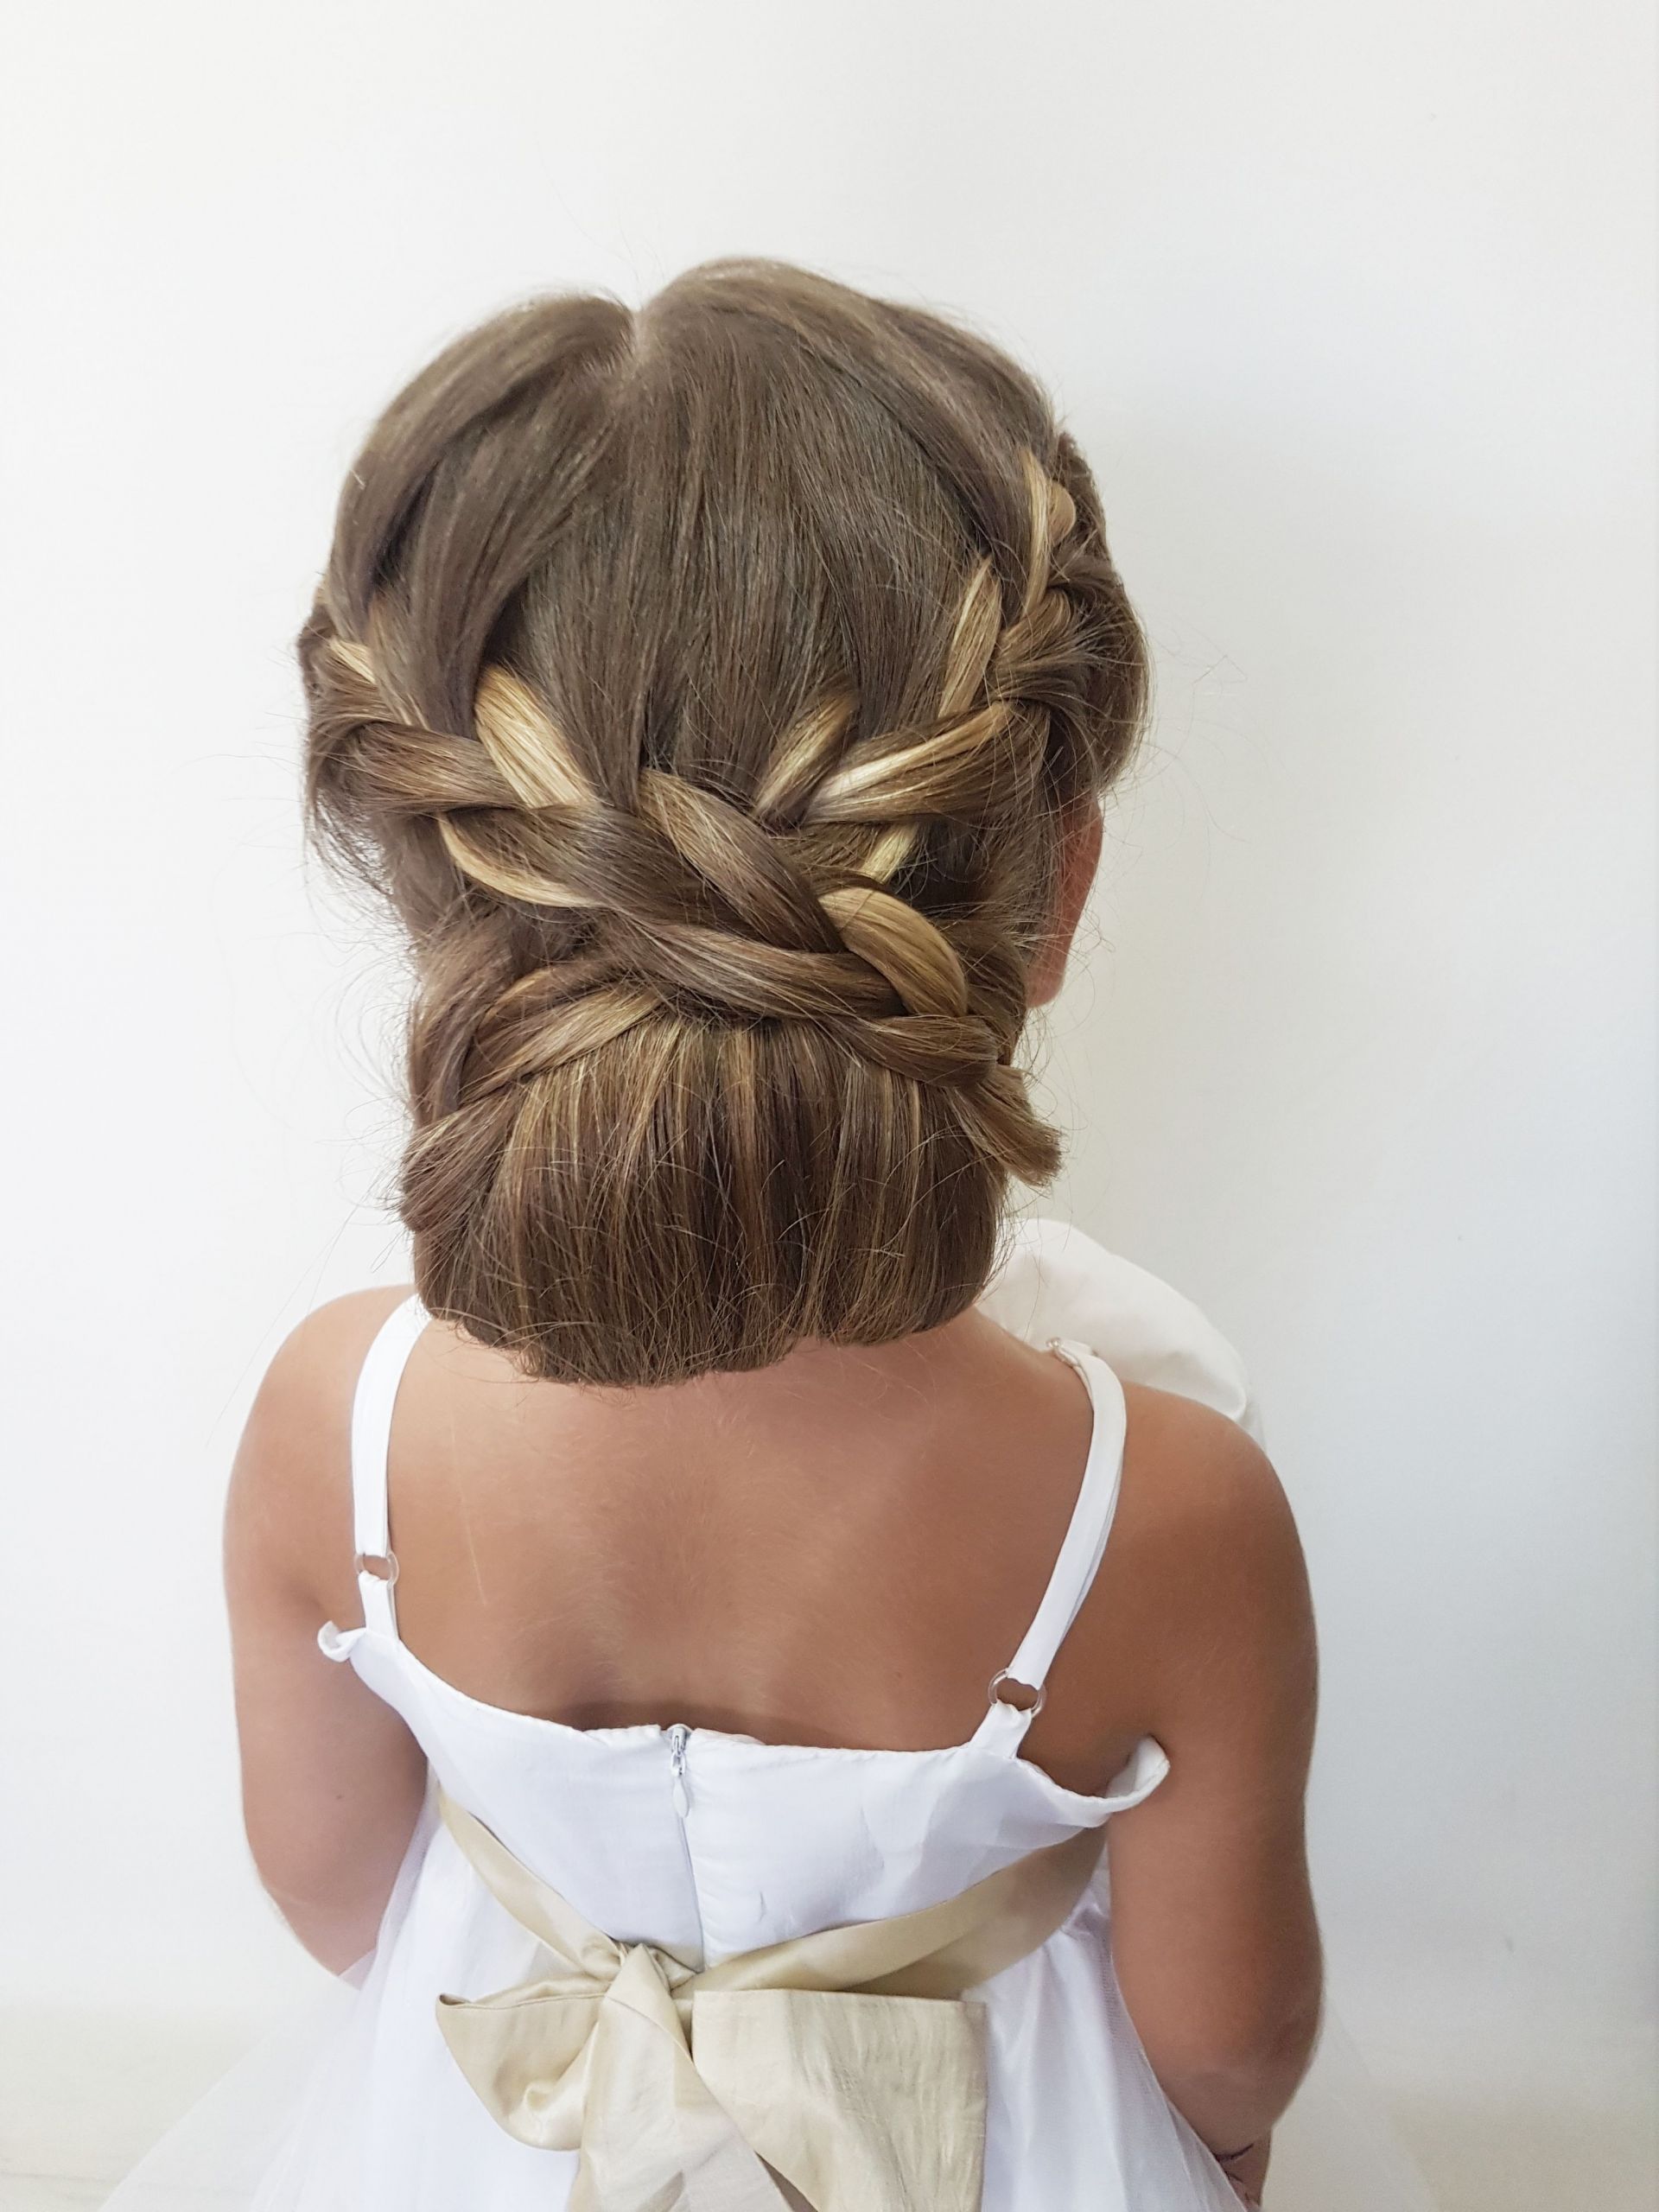 Toddler Wedding Hairstyles
 Pin by Kennedy Libengood on Hair&Beauty